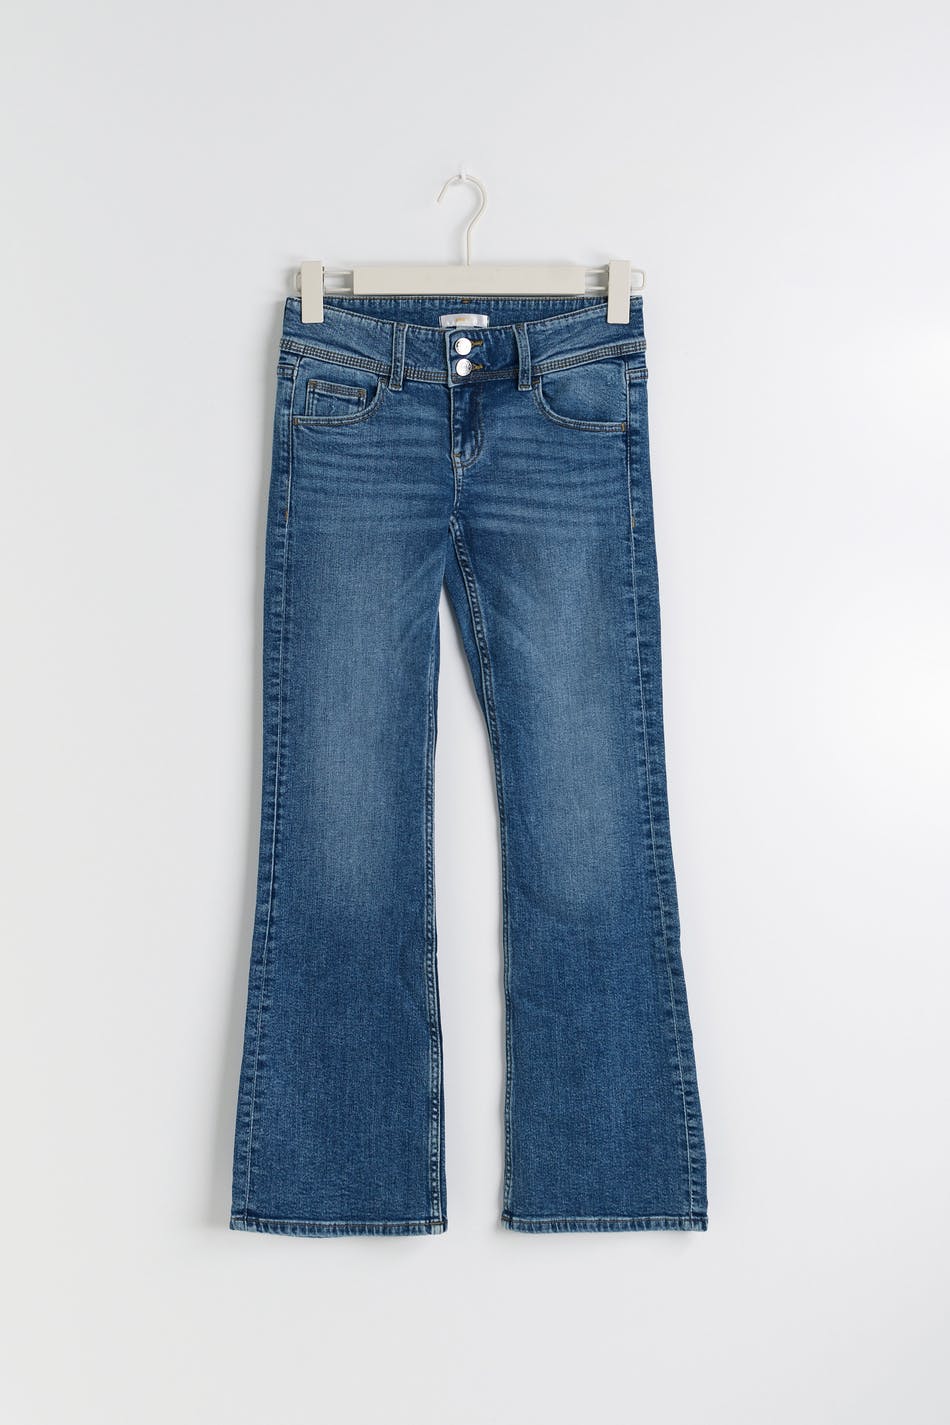 Gina Tricot - Flare pocket jeans tall - bootcut- Blue - 134 - Female